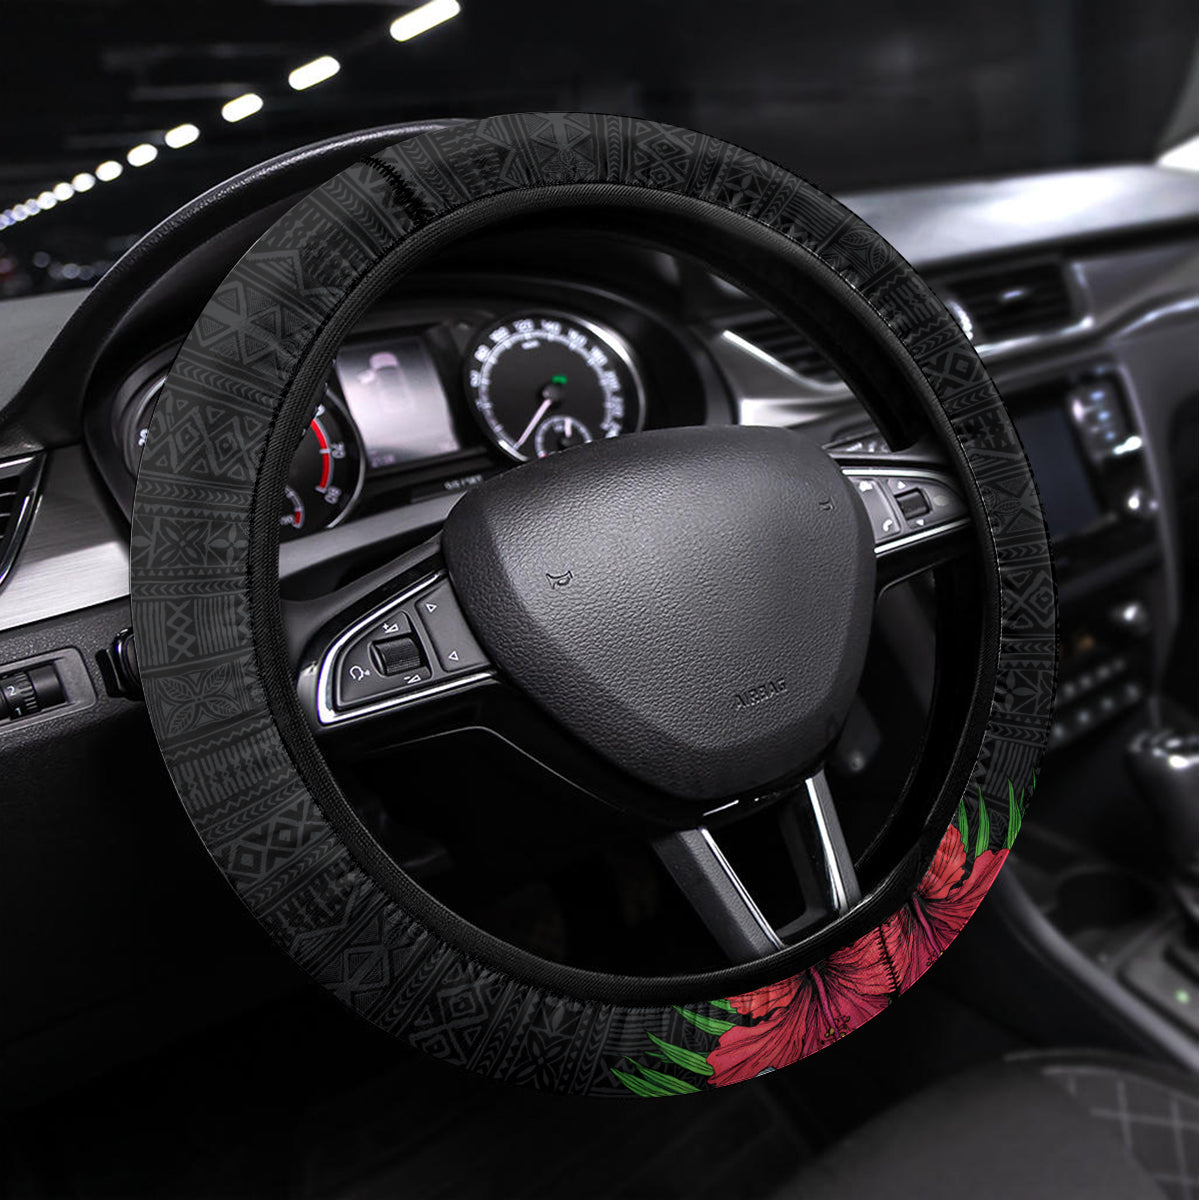 Hawaii Tropical Flowers and Leaves Steering Wheel Cover Tapa Pattern Colorful Mode